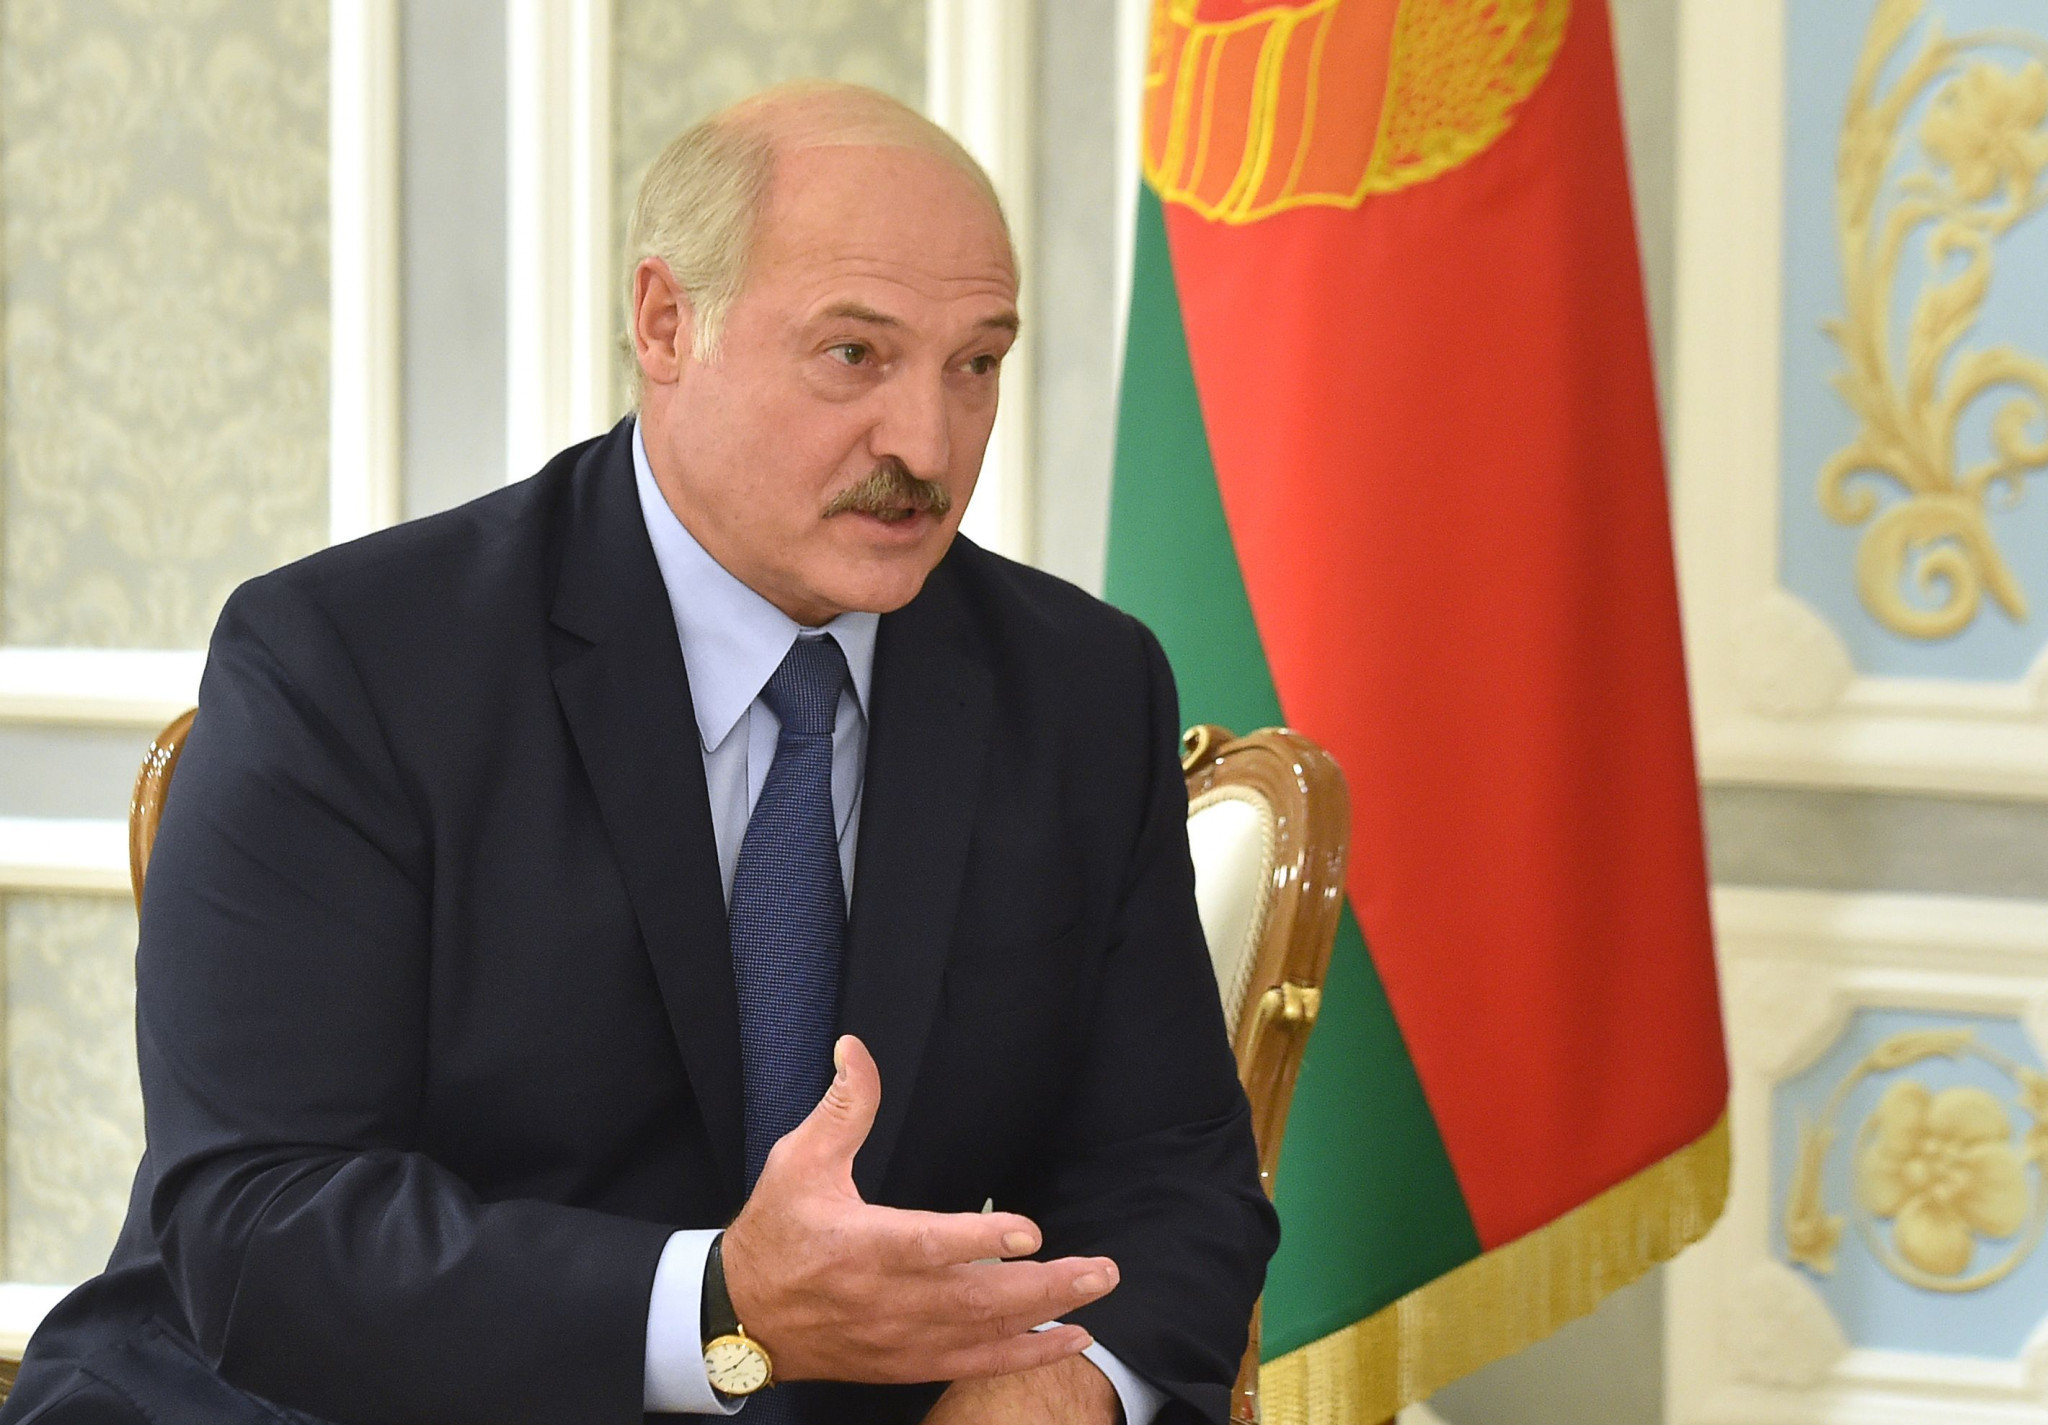 Belarus President targets co-hosting Olympics with Russia or Ukraine